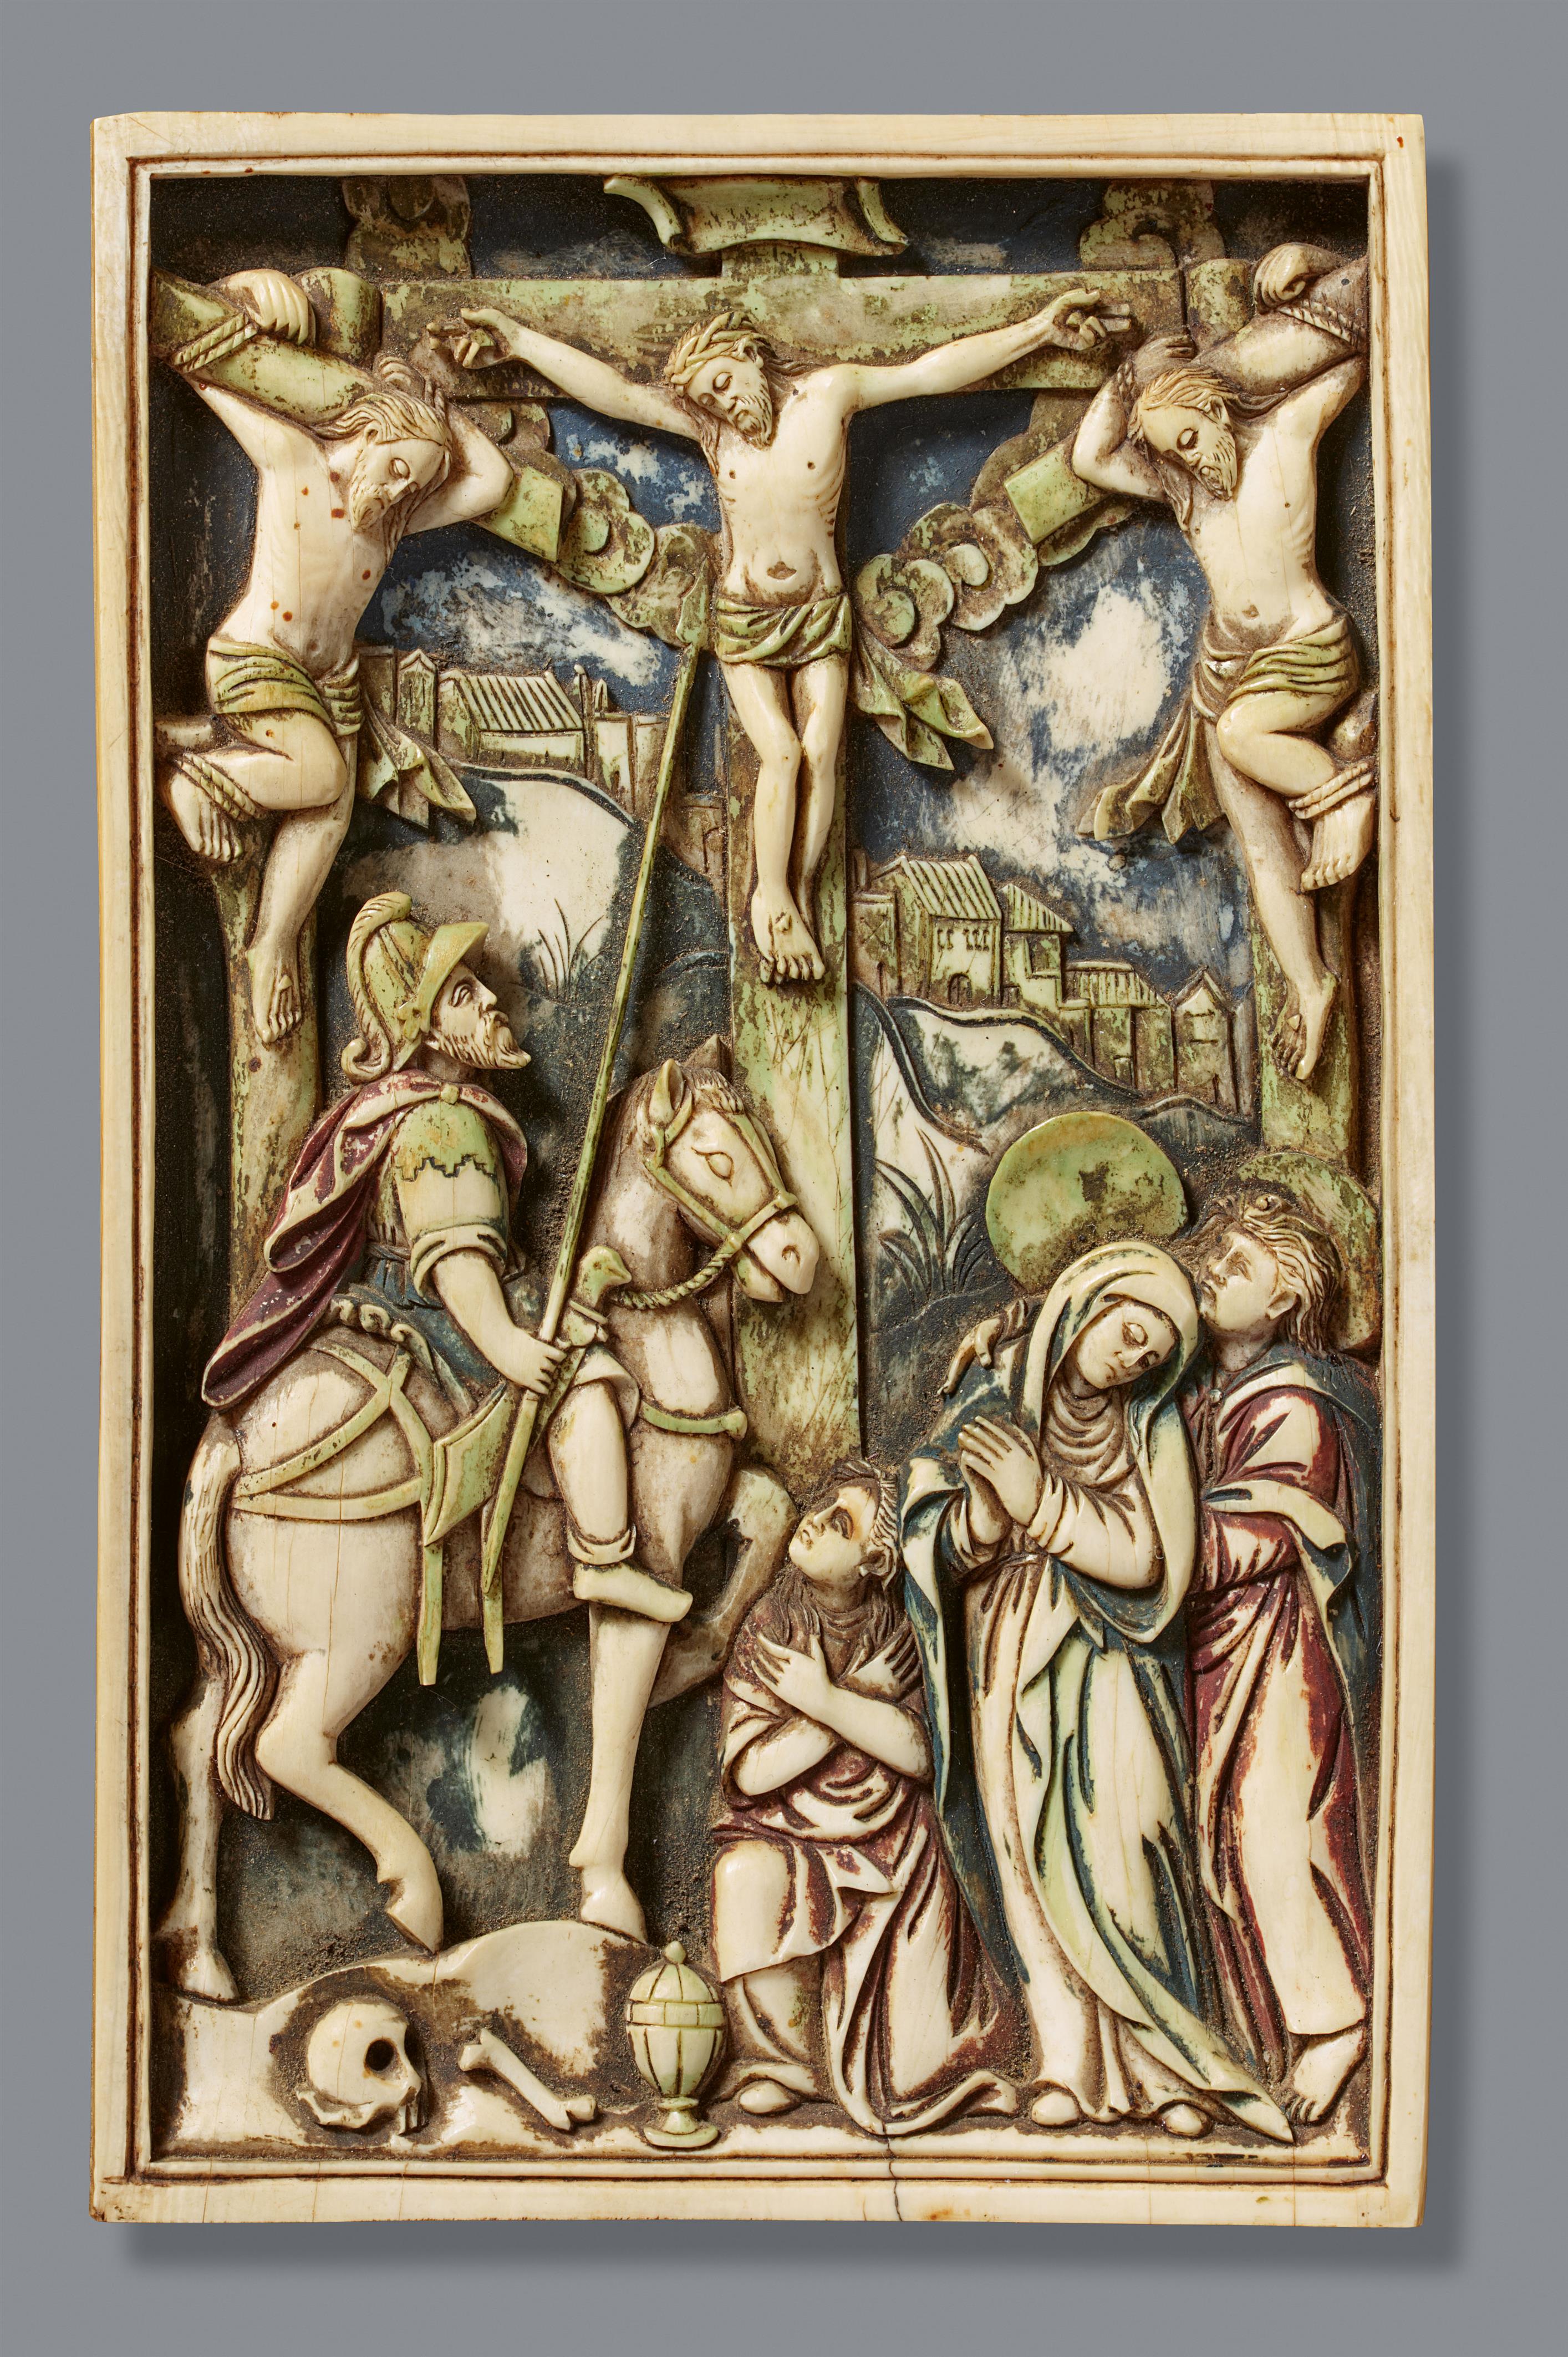 France 17th century - A 17th century French carved ivory Crucifixion relief - image-1